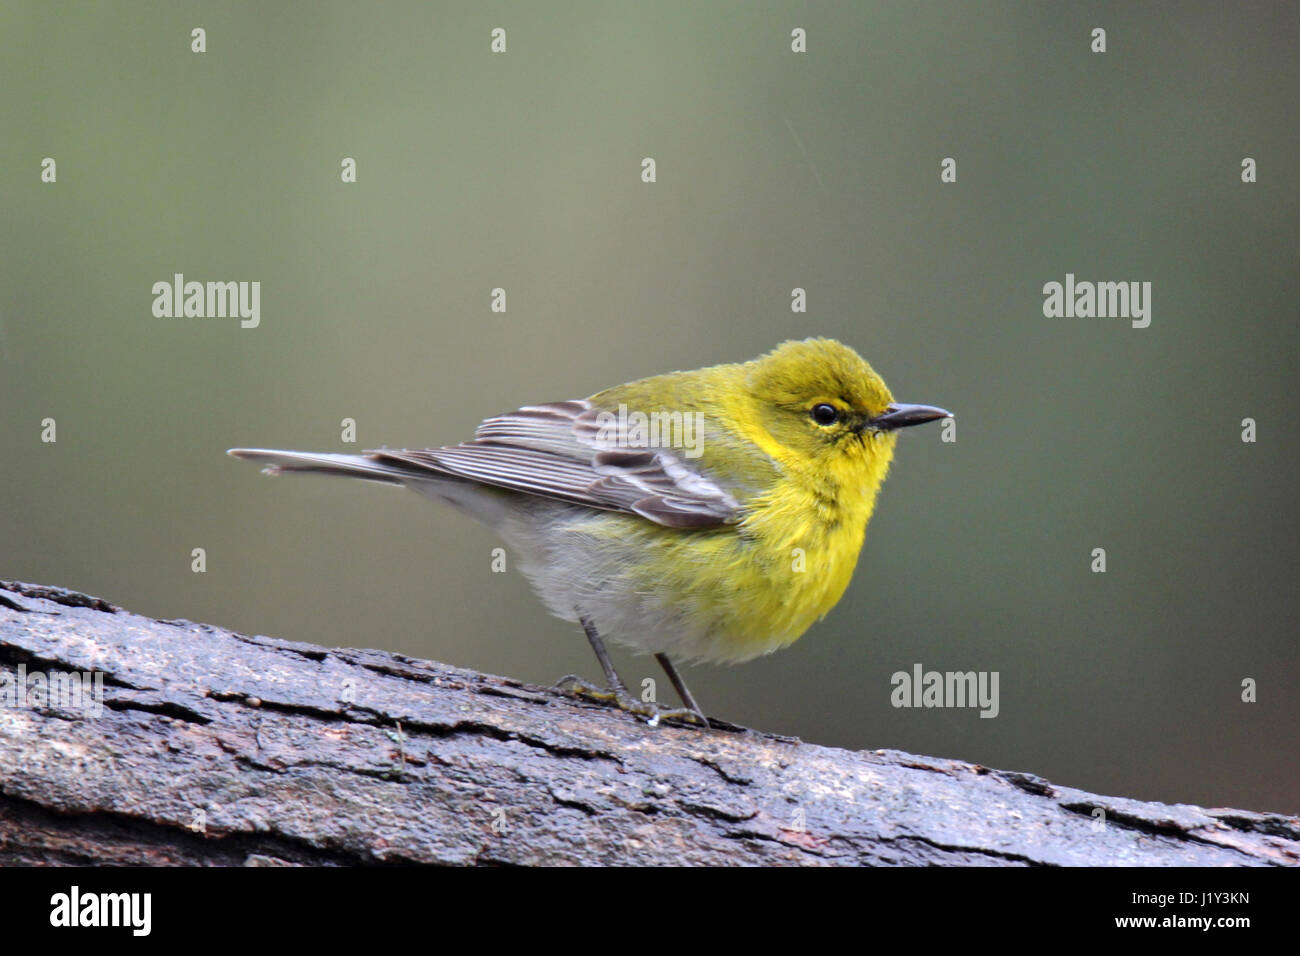 A pine warbler (Dendroica pinus) perching on a branch Stock Photo